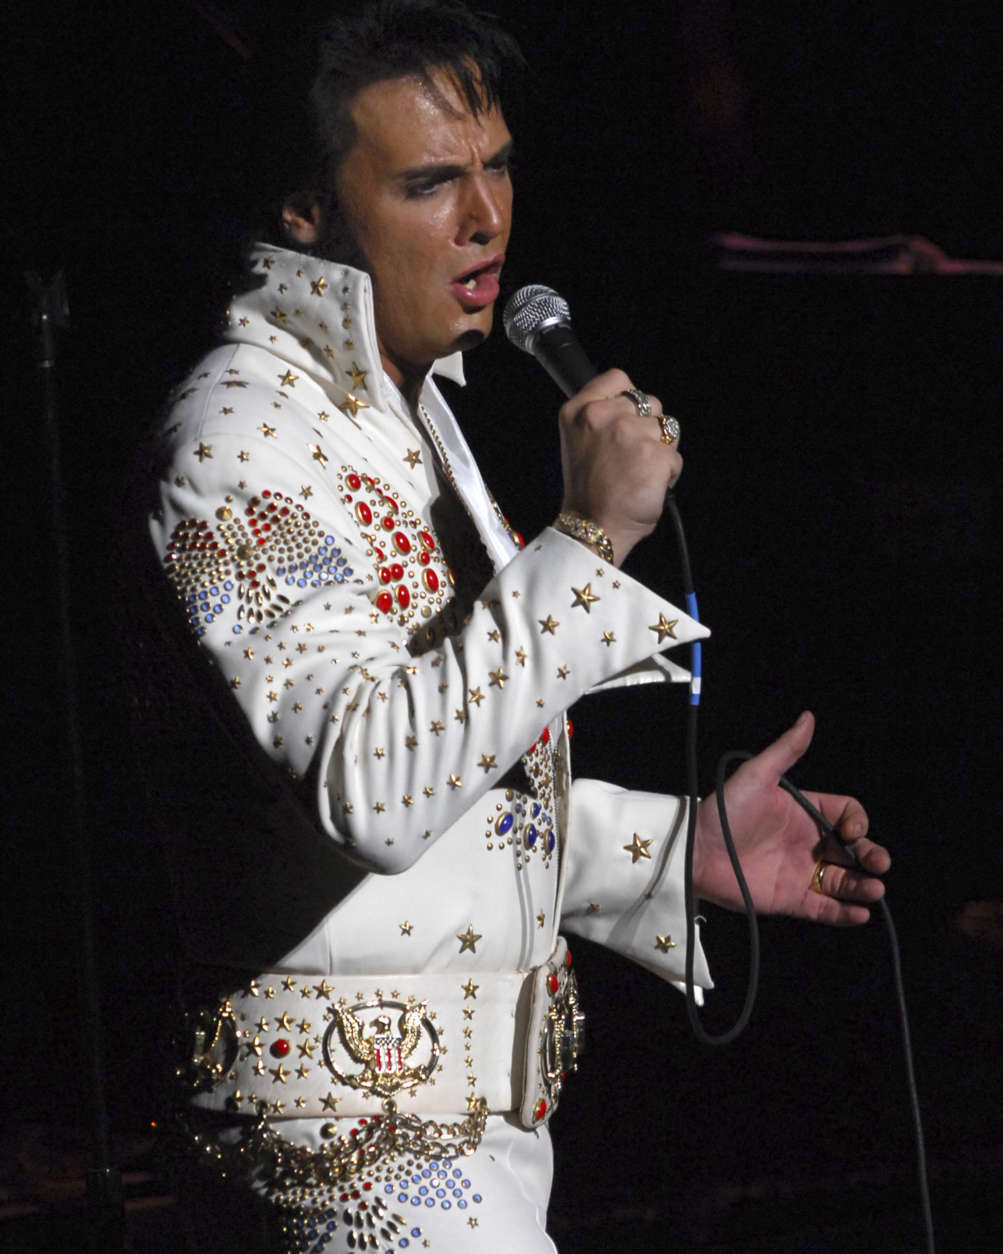 Shawn Klush from Pittston, Pa., performs during the Ultimate Elvis Tribute Artist Contest on Friday, Aug. 17, 2007 in Memphis, Tenn. Klush was named the winner of the contest, the first such contest sanctioned by Elvis Presley Enterprises. (AP Photo/Chris Desmond)